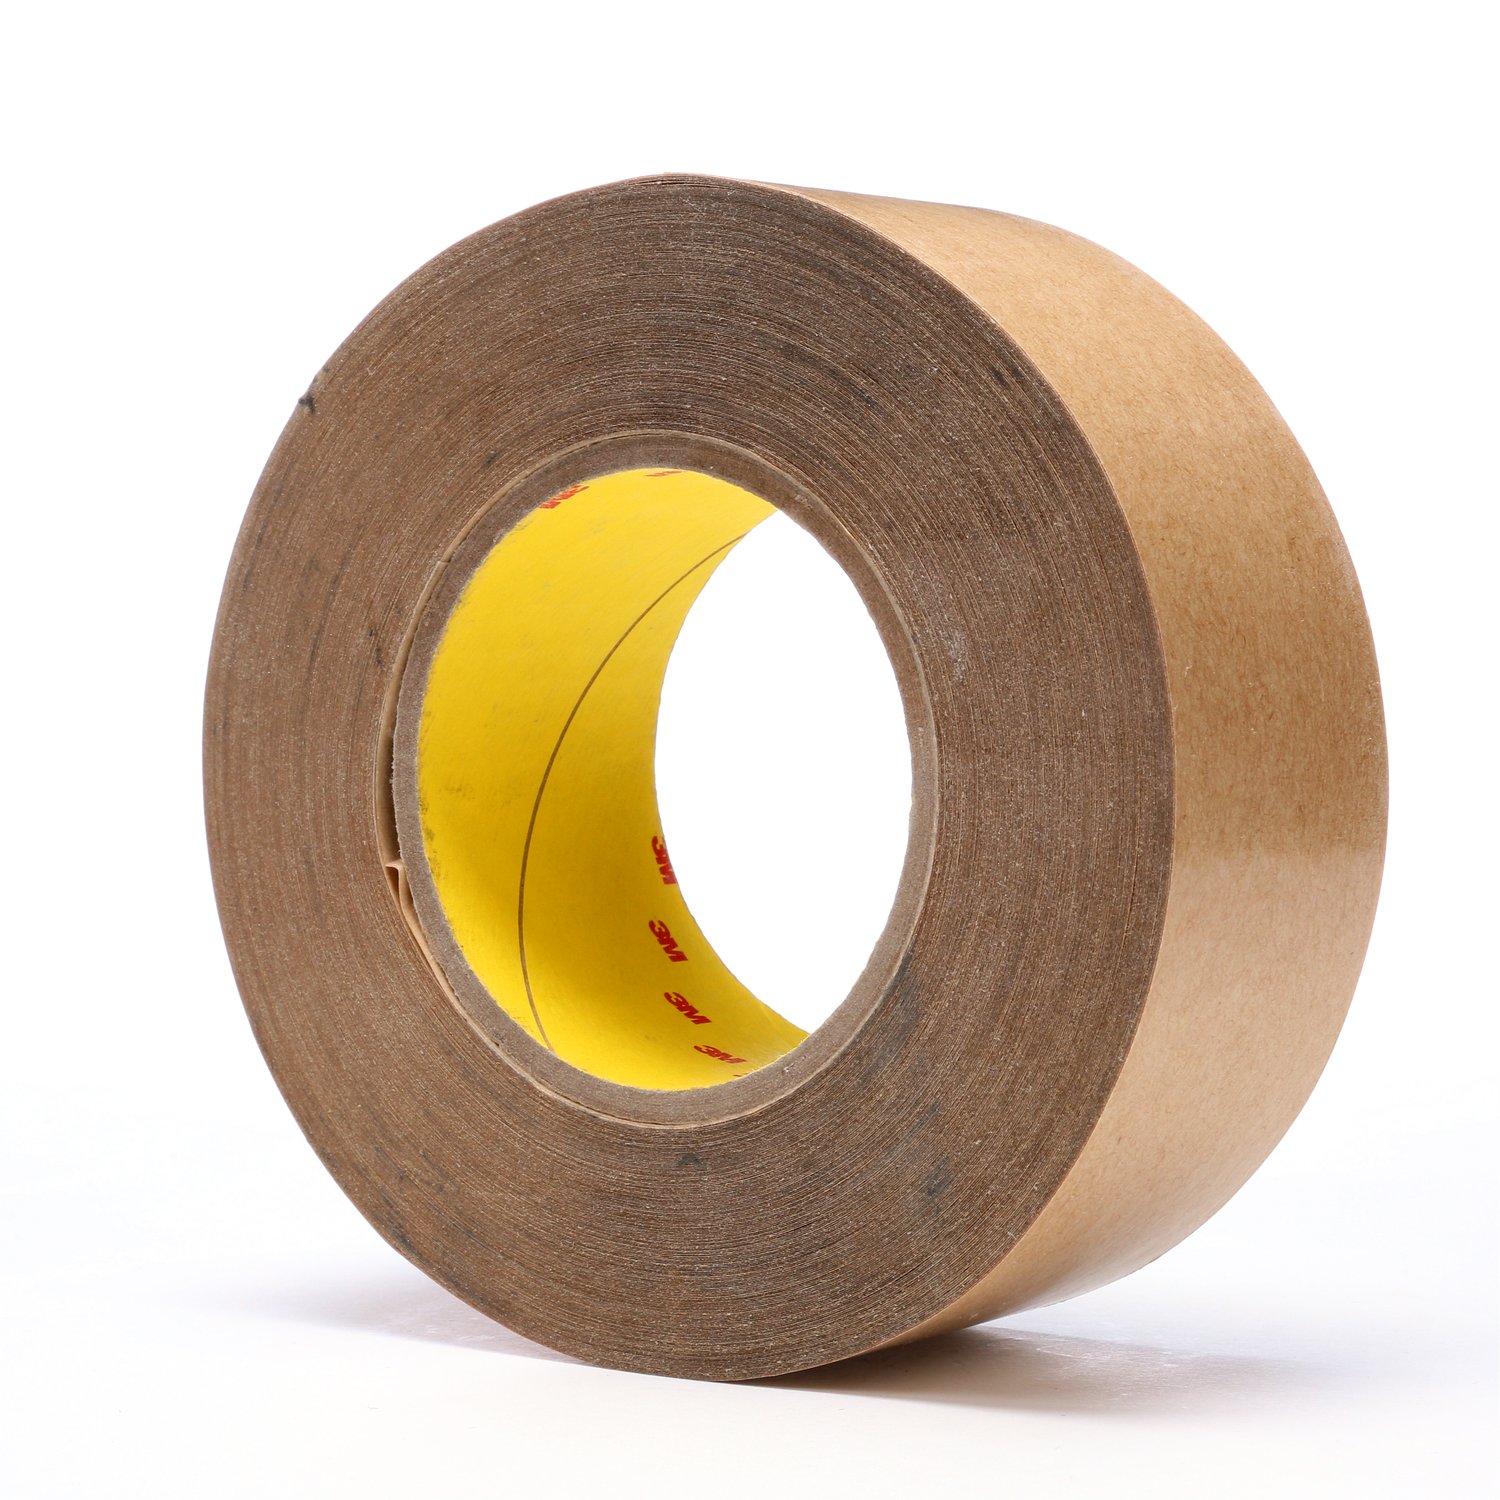 7000123298 - 3M Adhesive Transfer Tape 950, Clear, 2 in x 60 yd, 5 mil, 24 rolls per
case